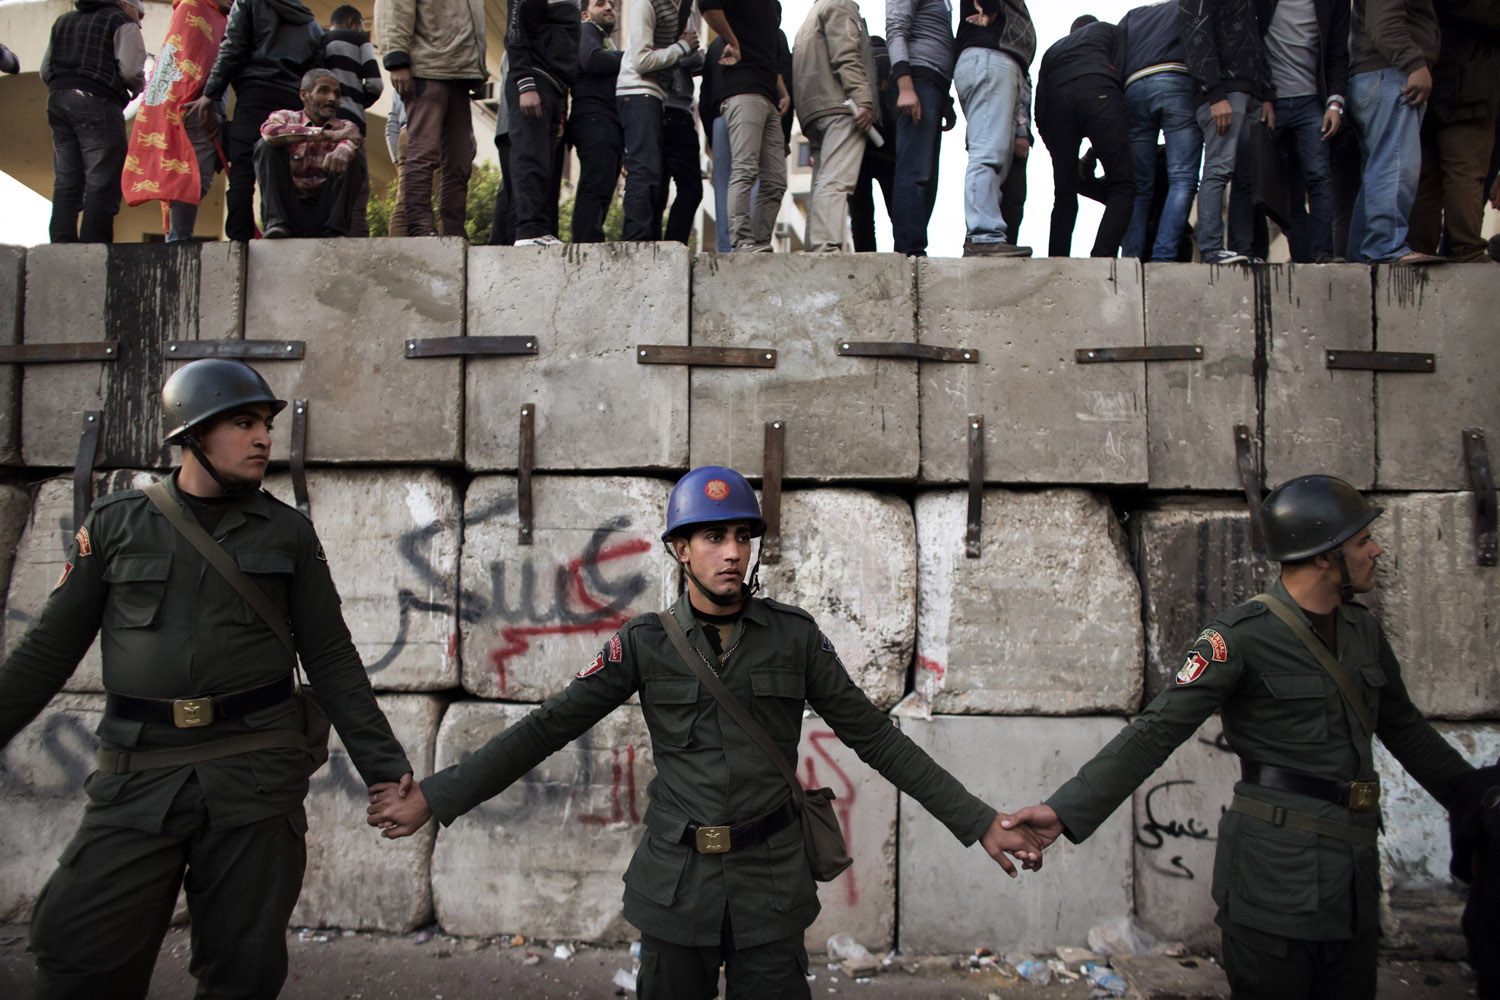 Dec. 11, 2012. Egyptian soldiers form a line in front as protestors against Egyptian President Mohamed Morsi stand atop barricades erected by the army to protect the Presidential Palace in Cairo. Demonstrators gathered for rival rallies over a deeply disputed constitutional referendum proposed by President Morsi.